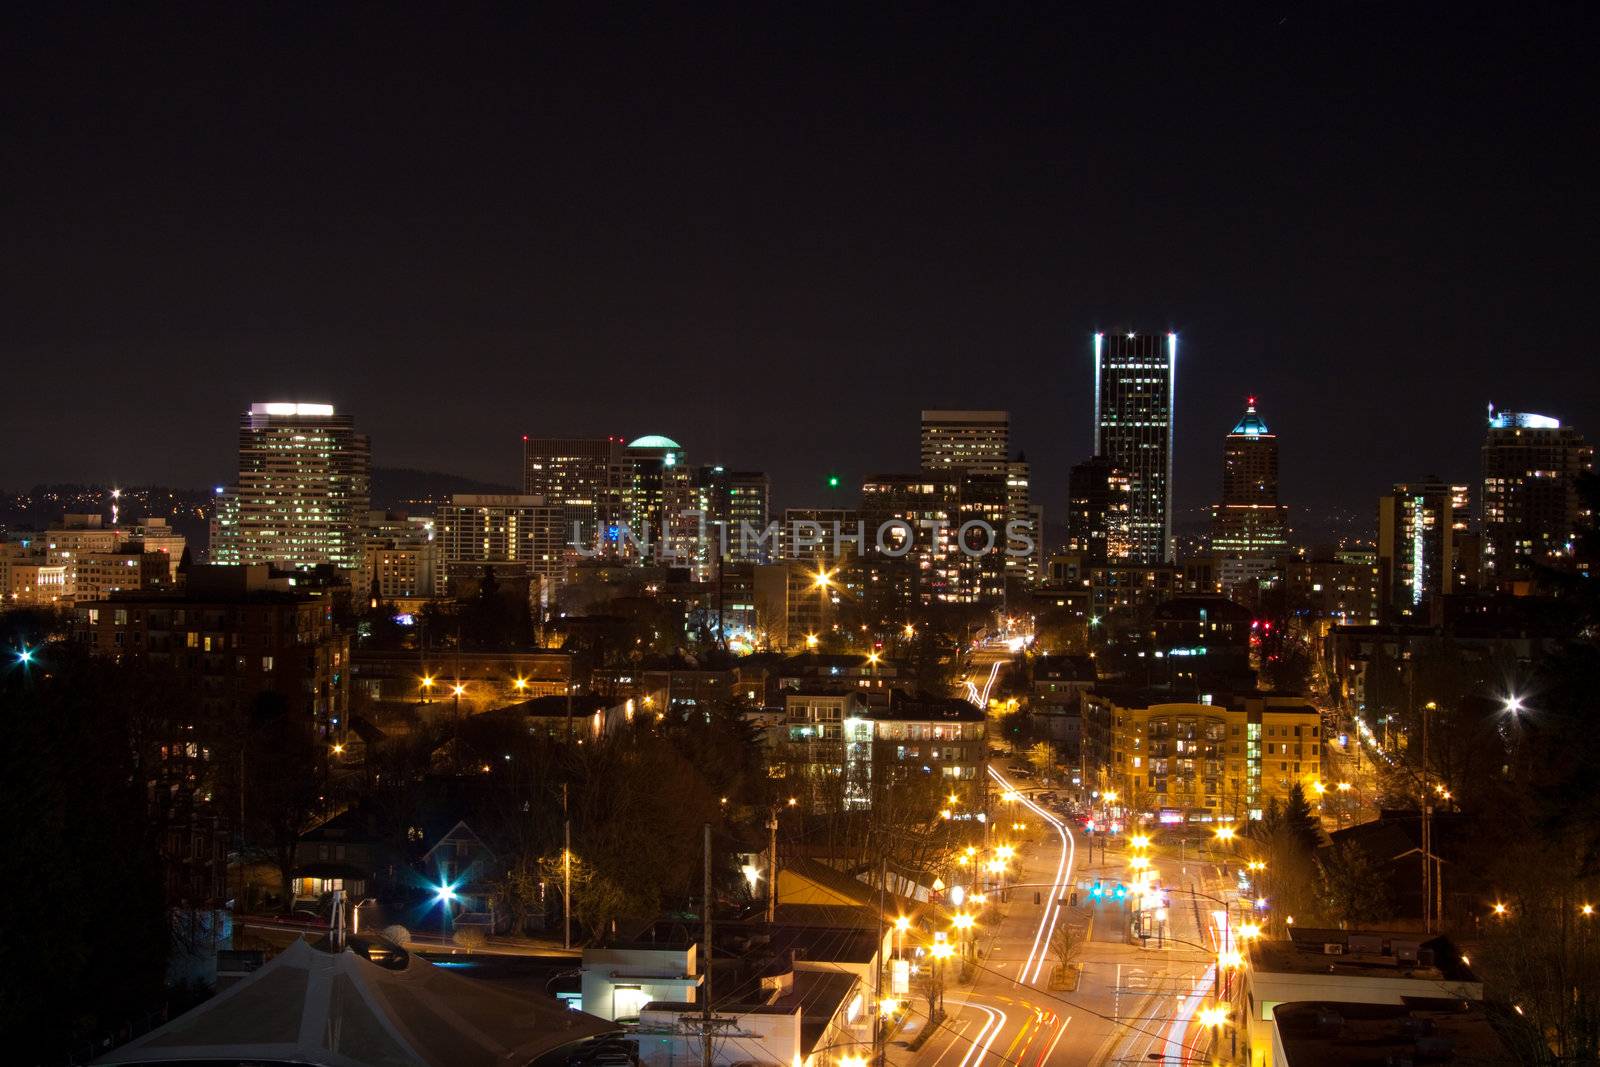 Photos of downtown portland oregon at night showing the busy urban city life of this northwest metro area.